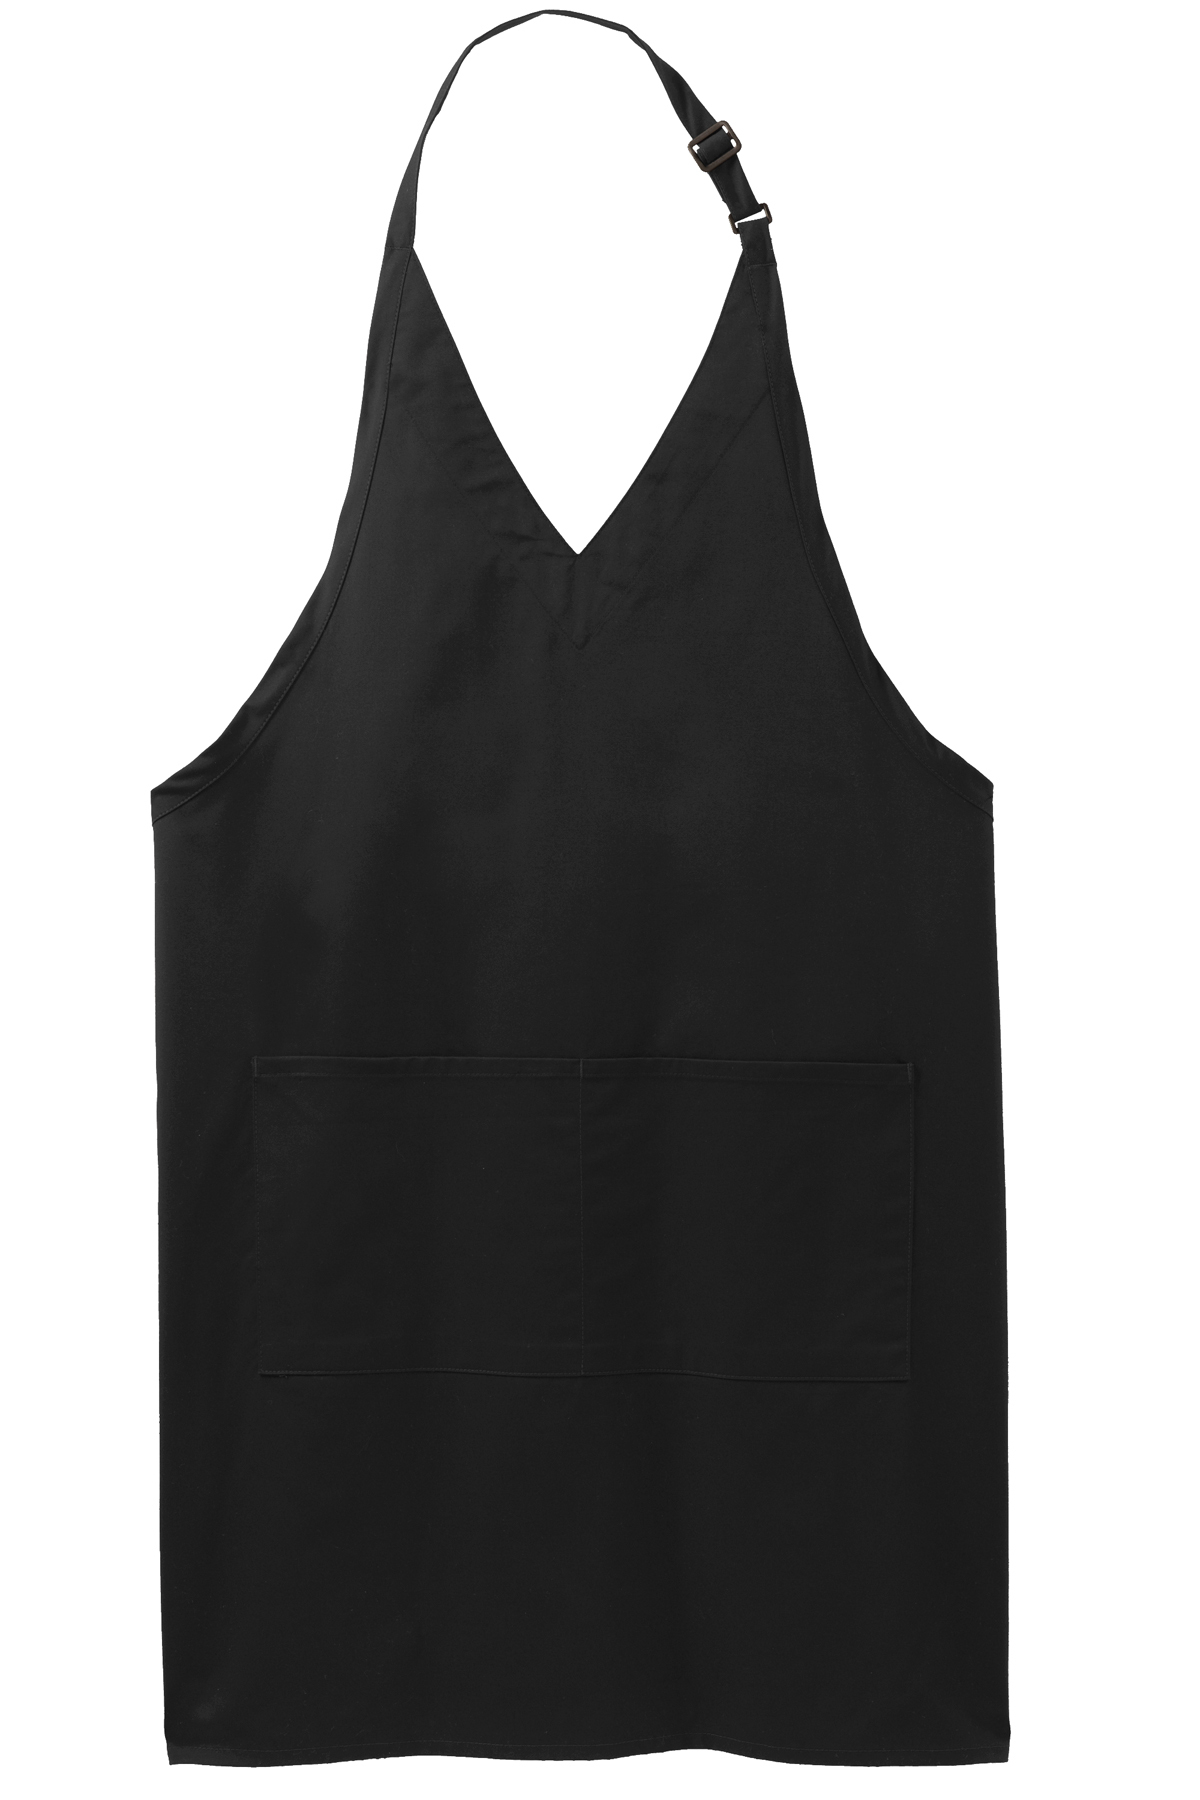 Port Authority Easy Care Tuxedo Apron with Stain Release | Product | SanMar